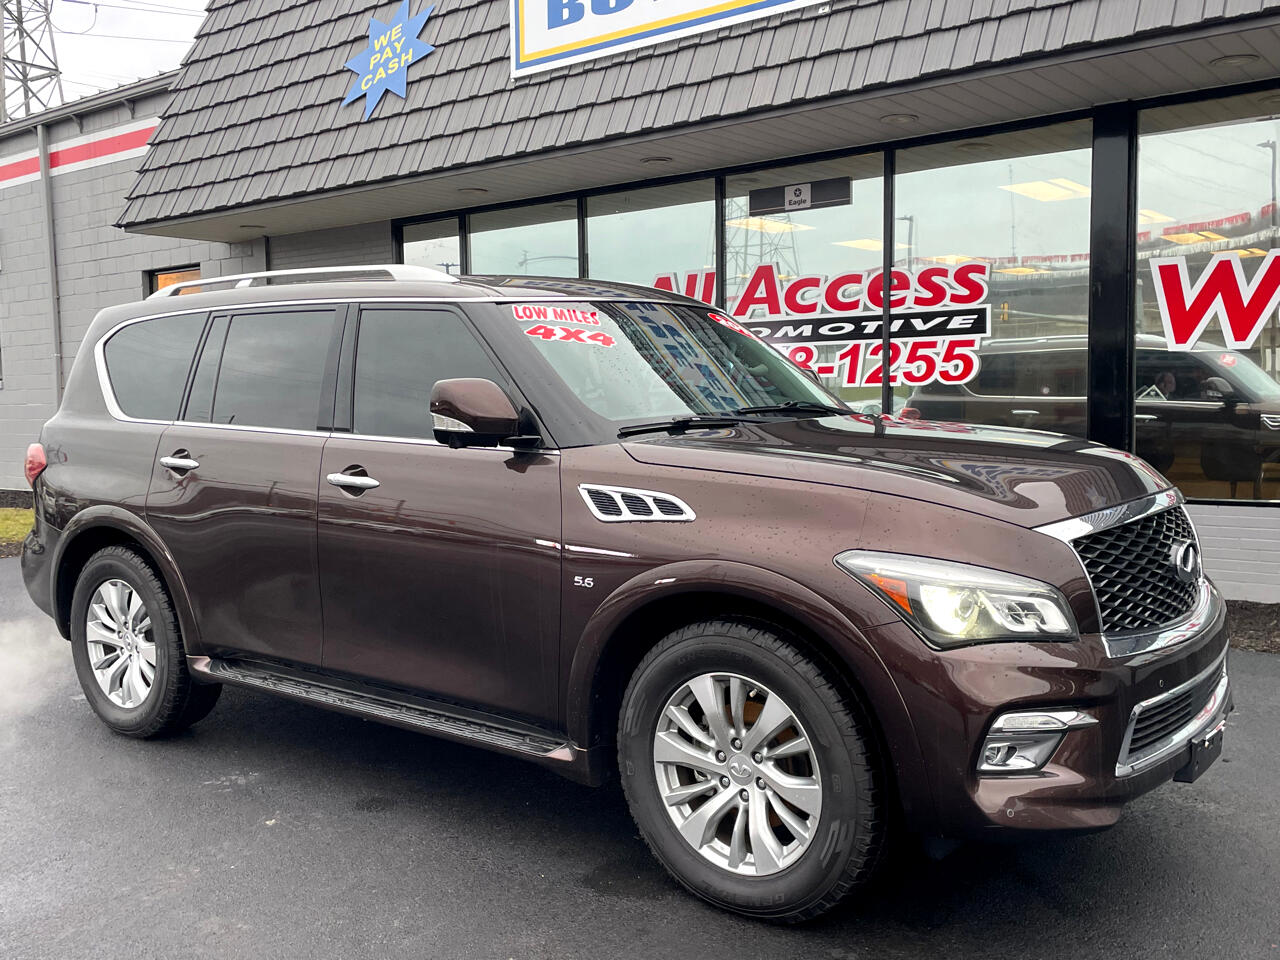 Used 2017 Infiniti QX80 BASE for Sale in New Brighton PA 15066 All 